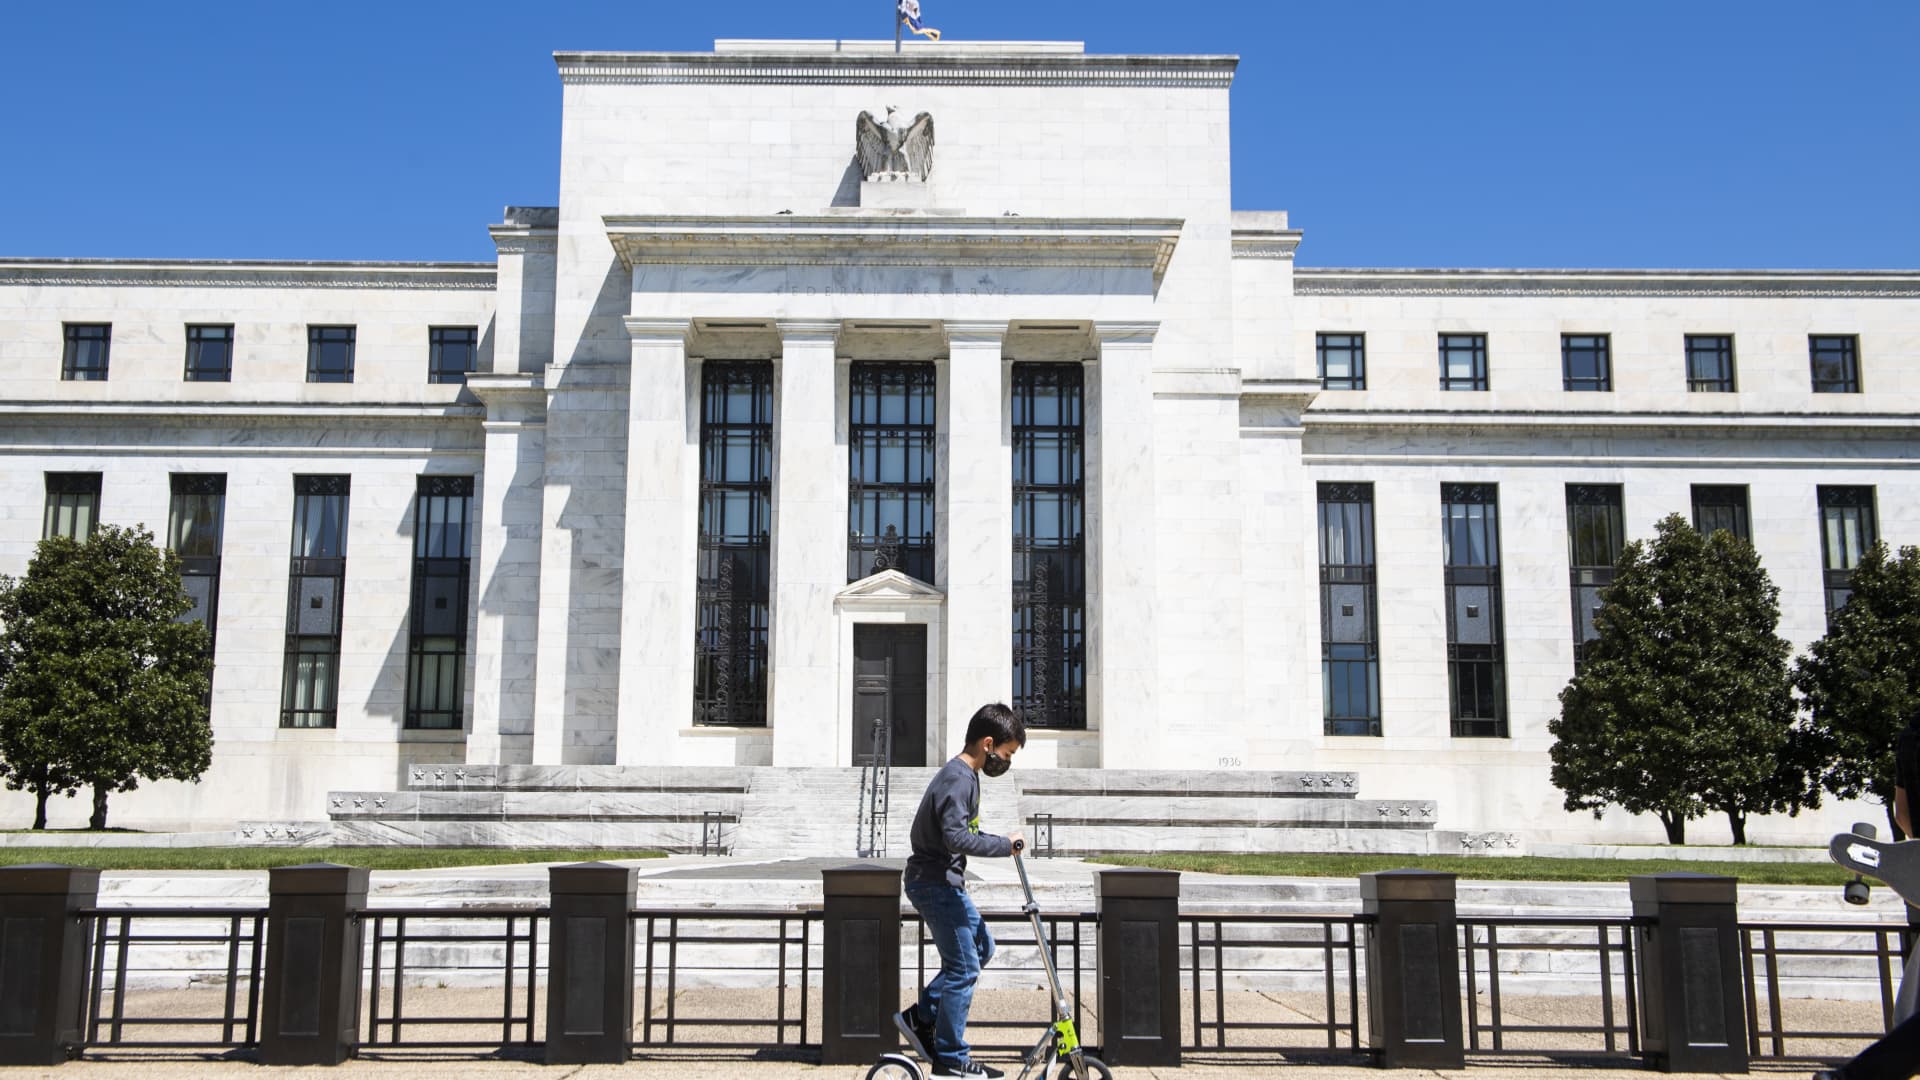 A child passes by the Marriner S. Eccles Federal Reserve Board Building on Constitution Avenue, NW, on Monday, April 26, 2021.